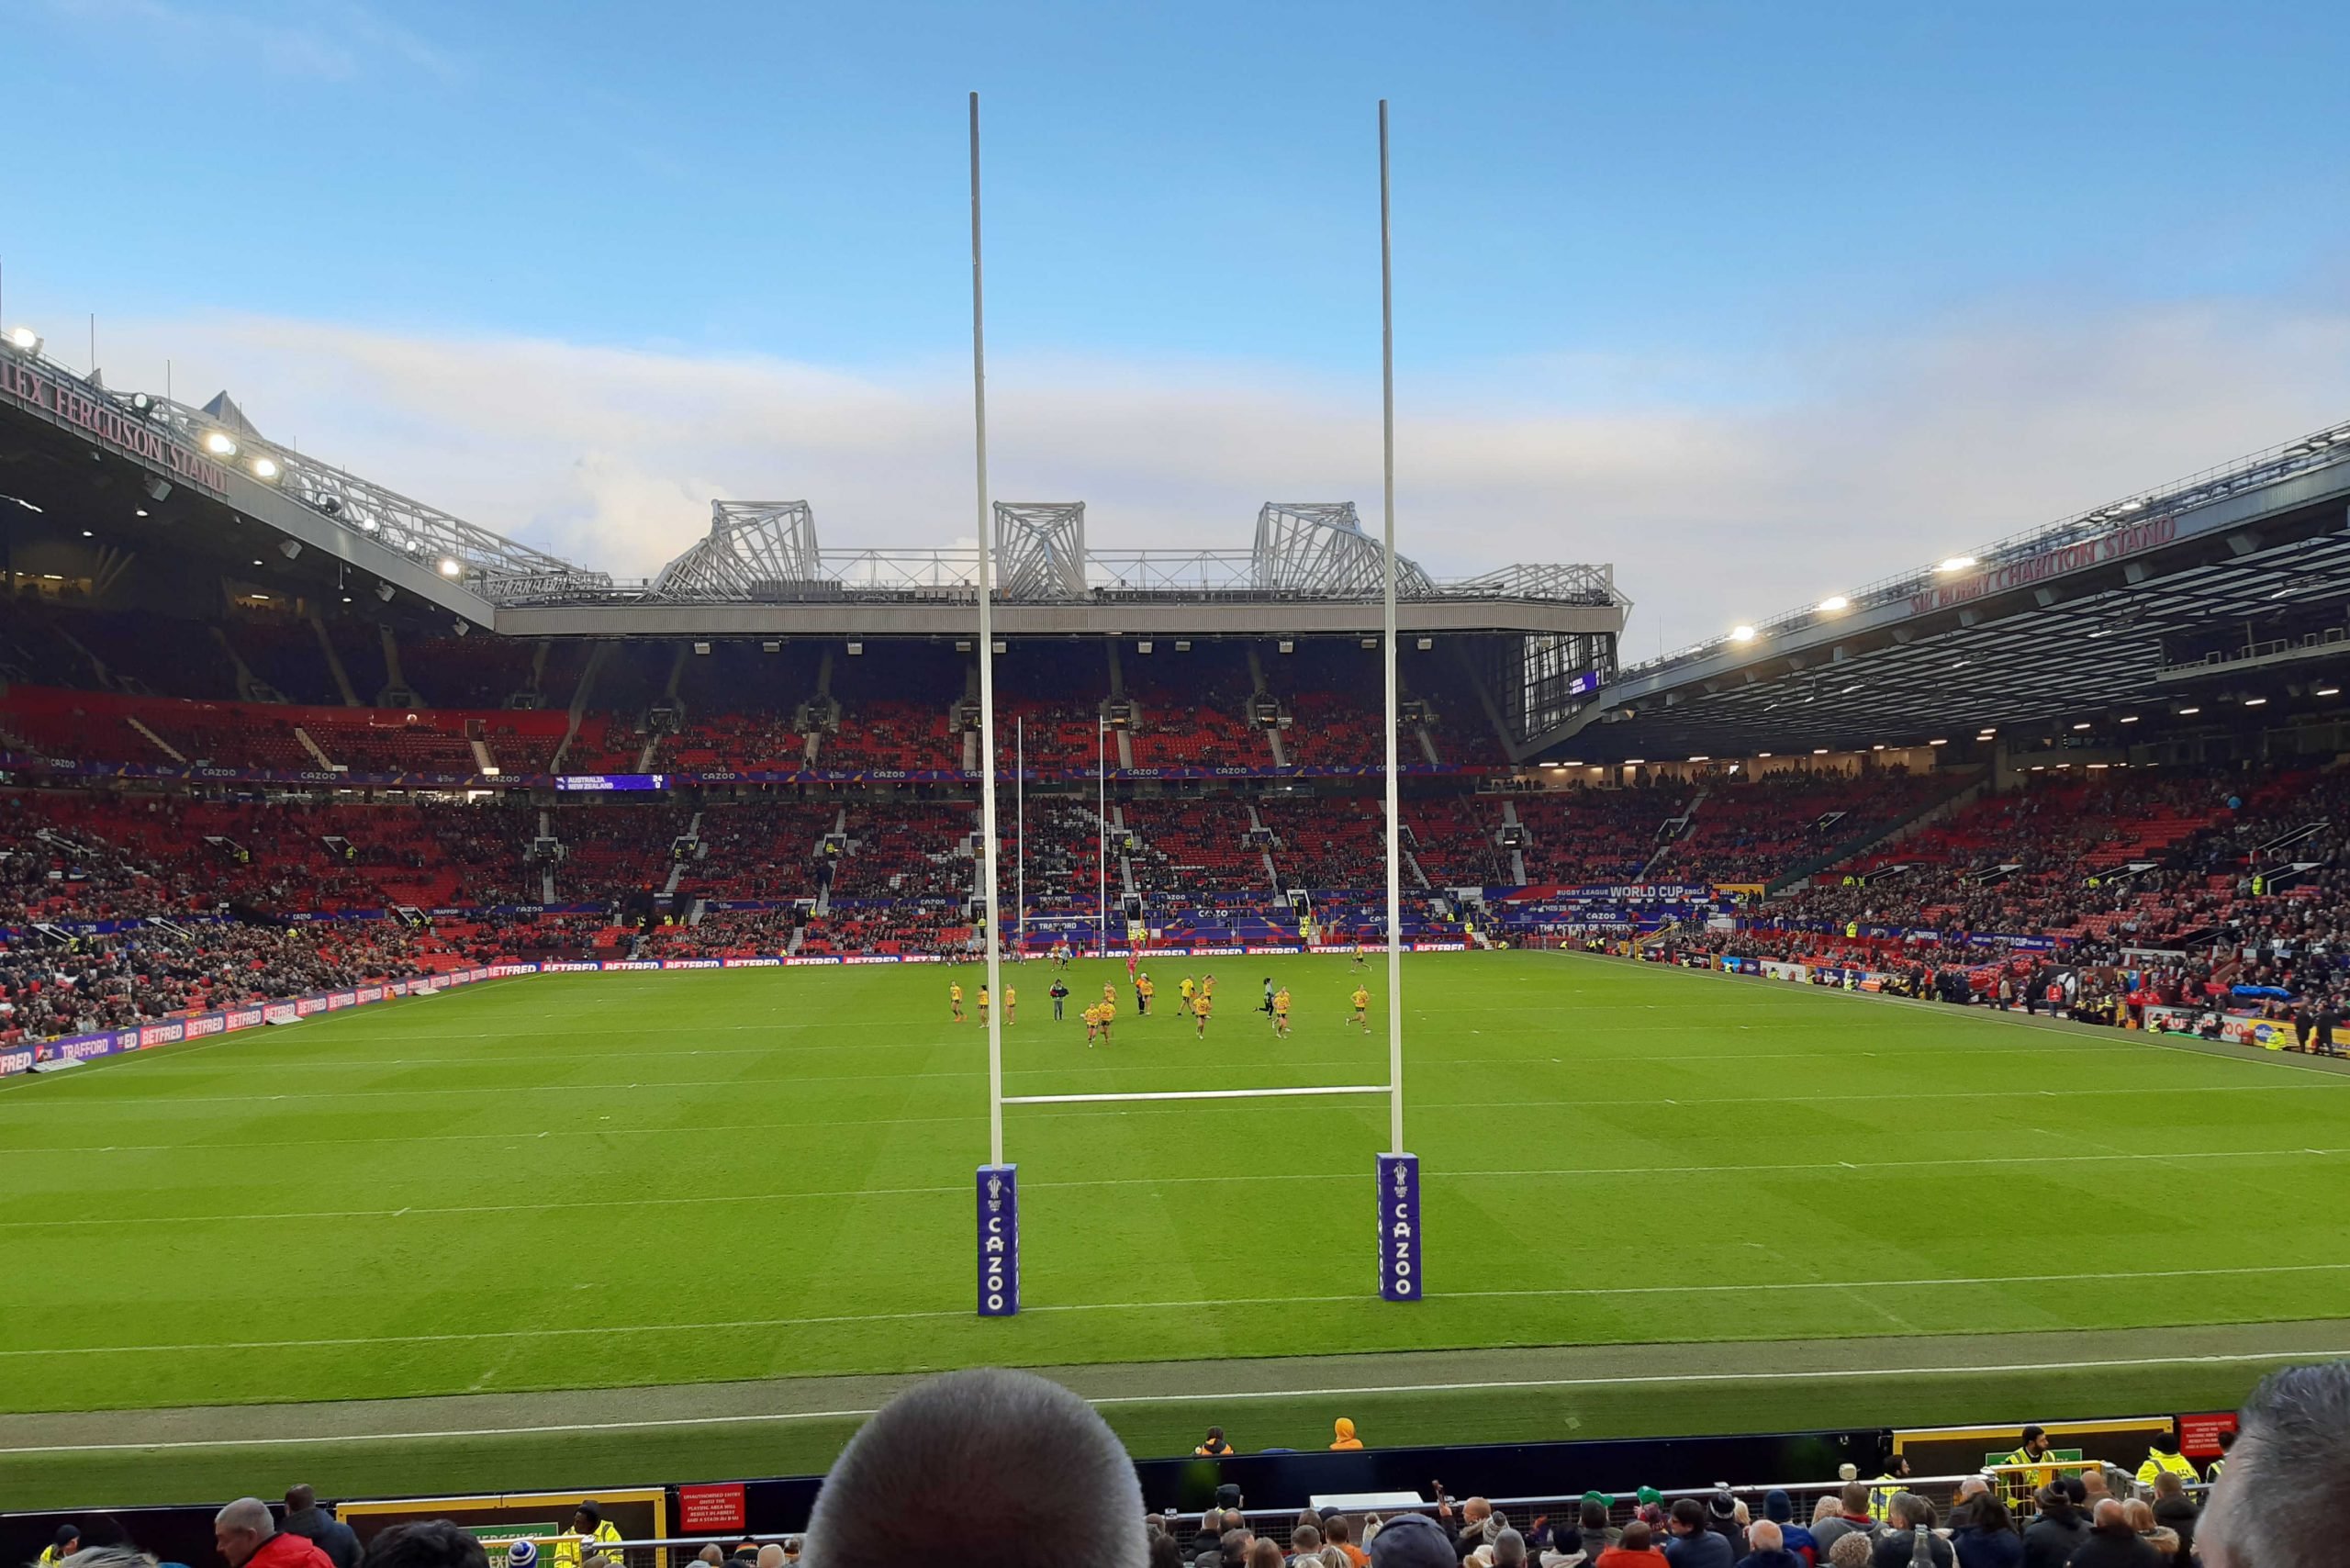 Manchester stadium ready for Rugby League World Cup Final in 2022.